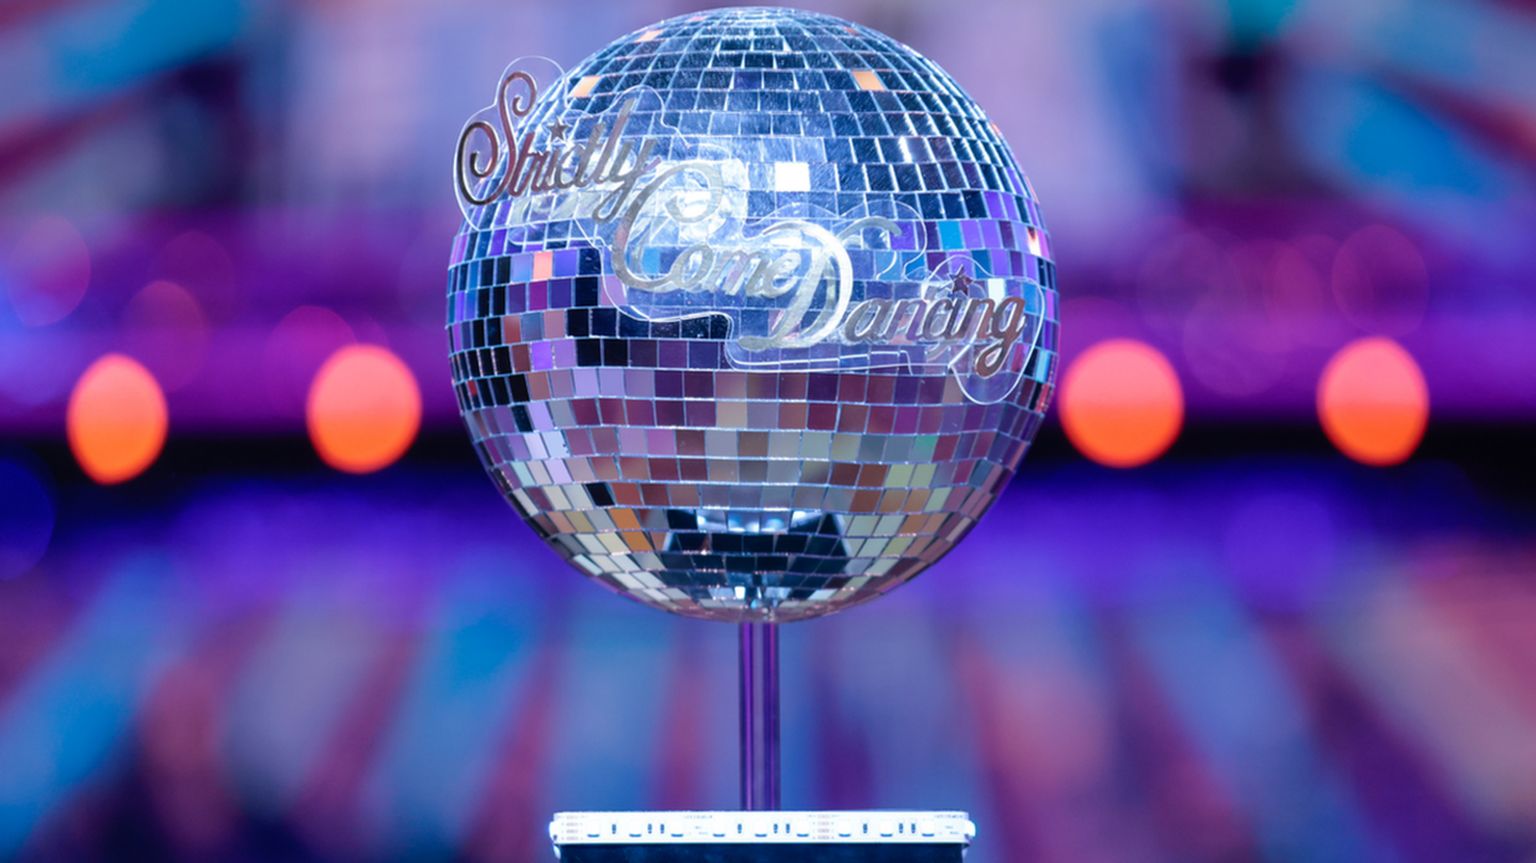 Strictly Come Dancing trophy